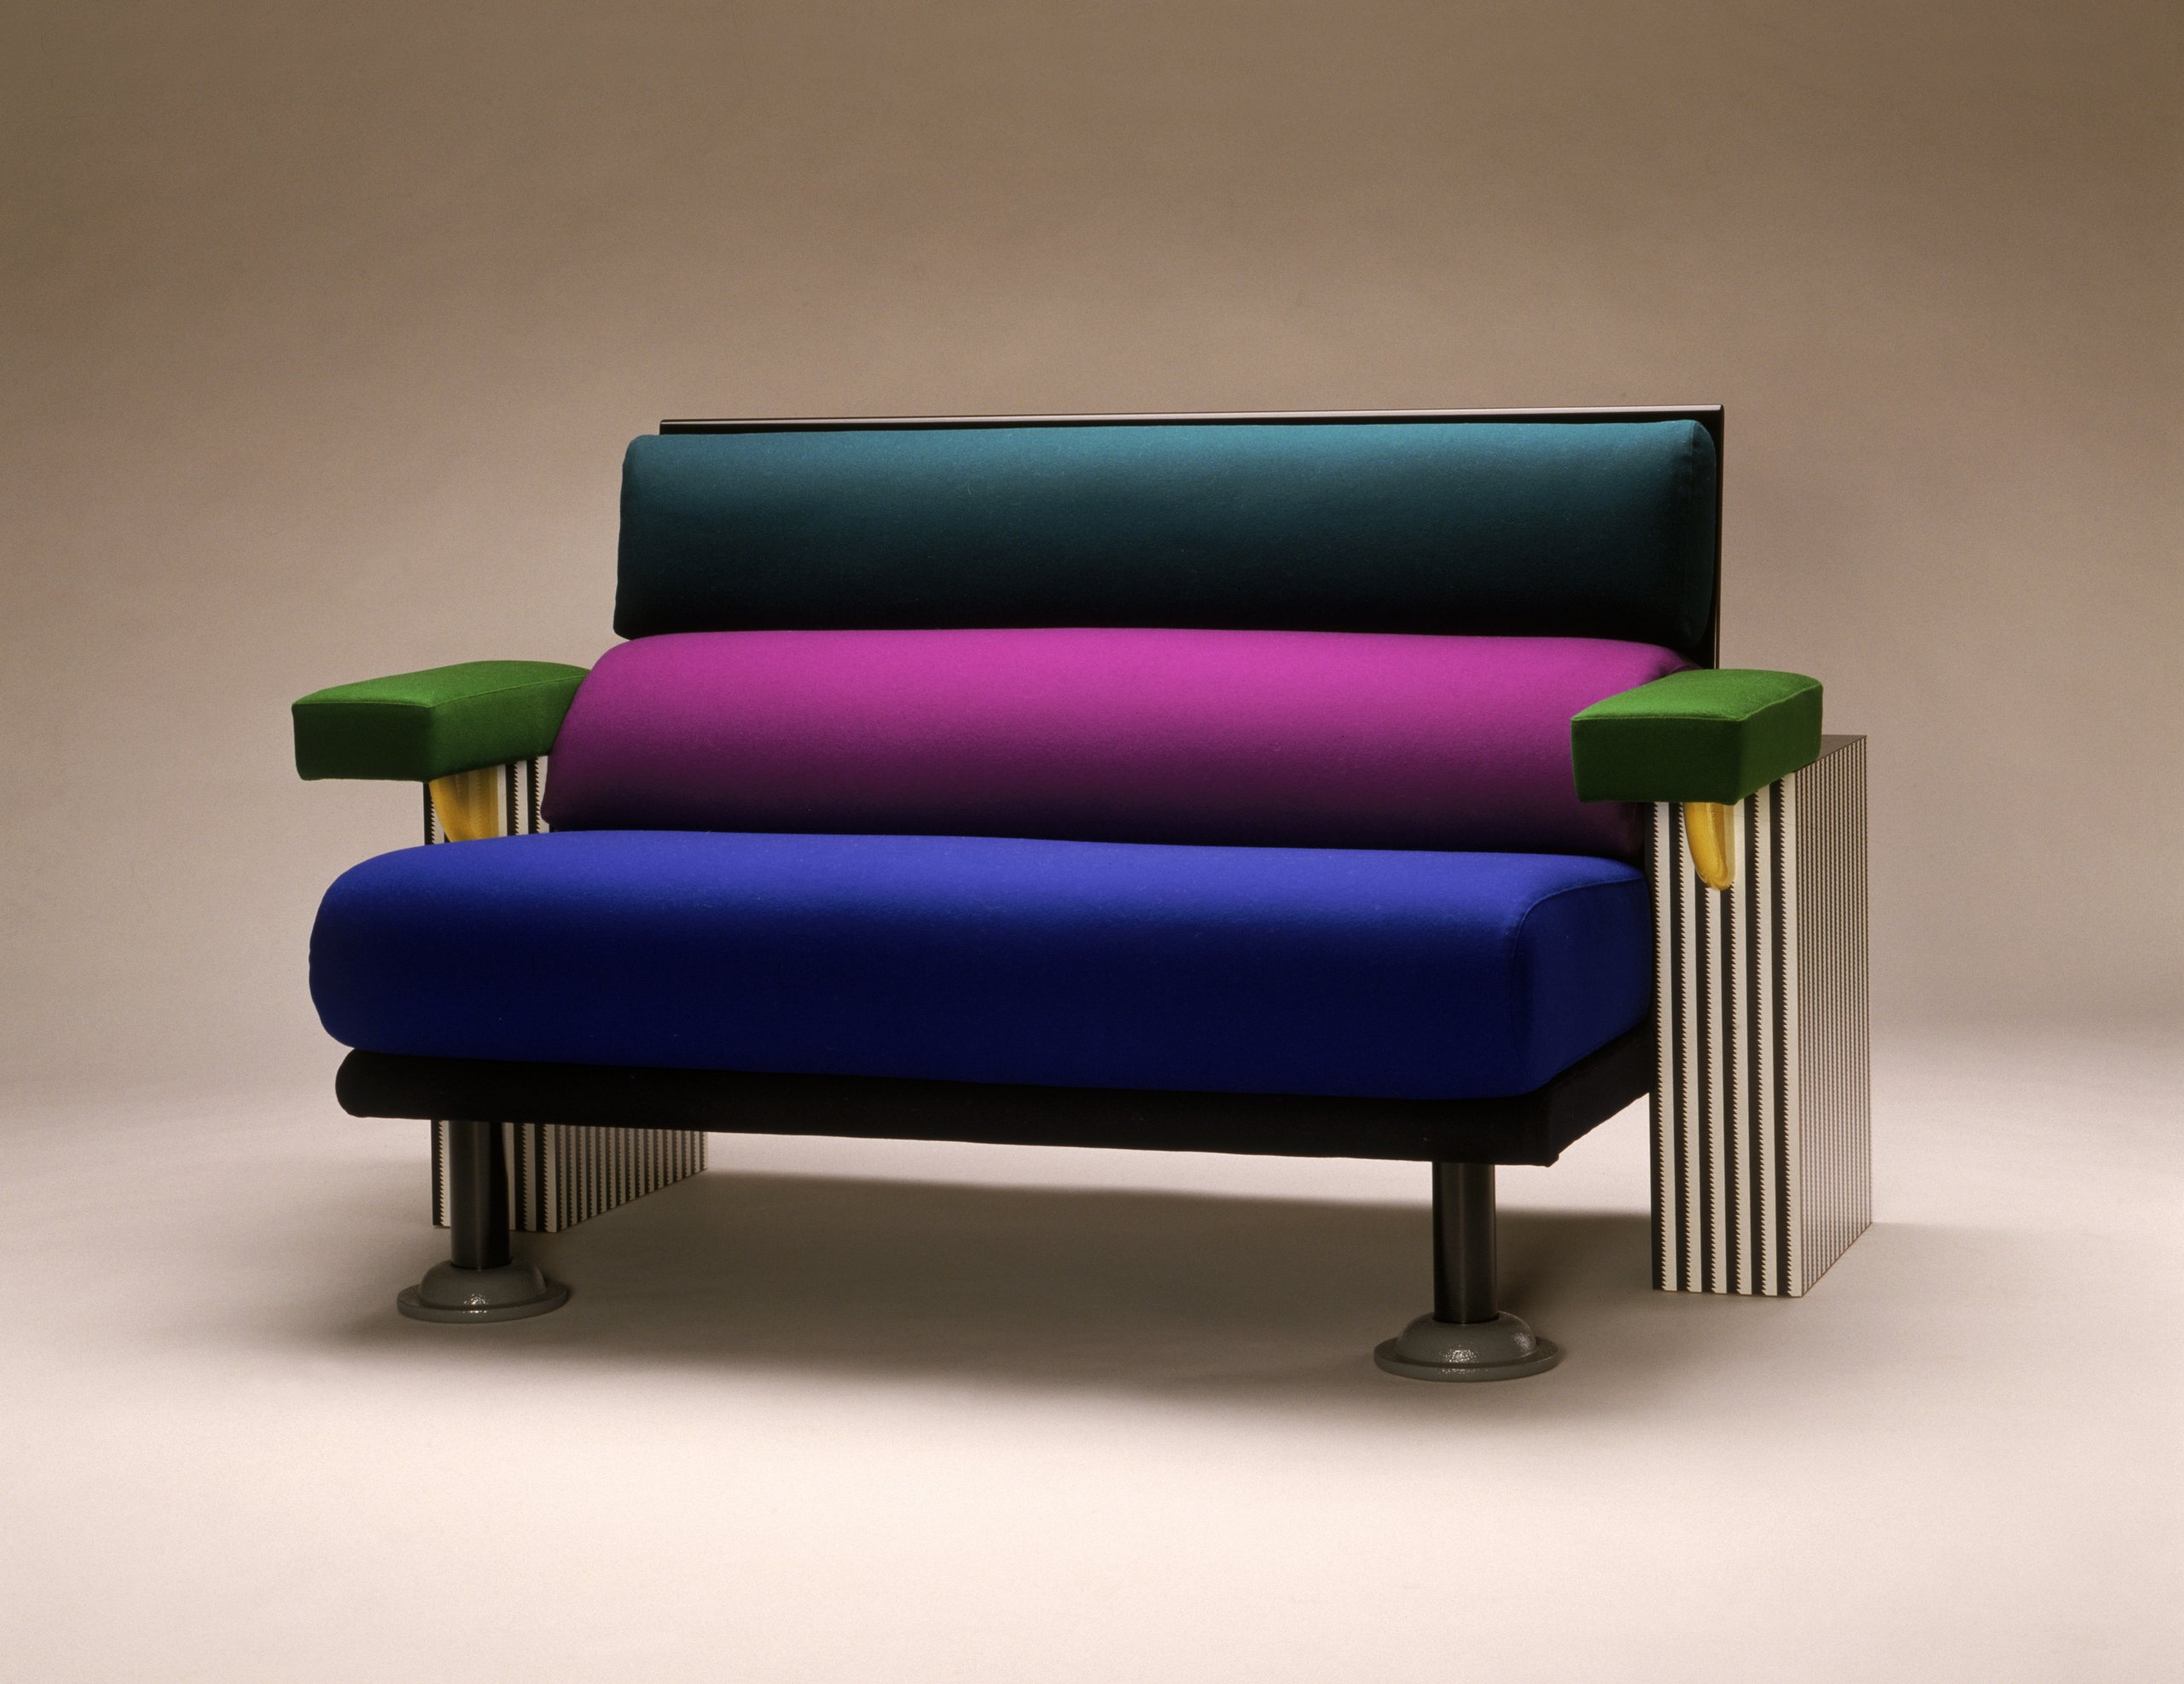 'Lido' couch made by Memphis